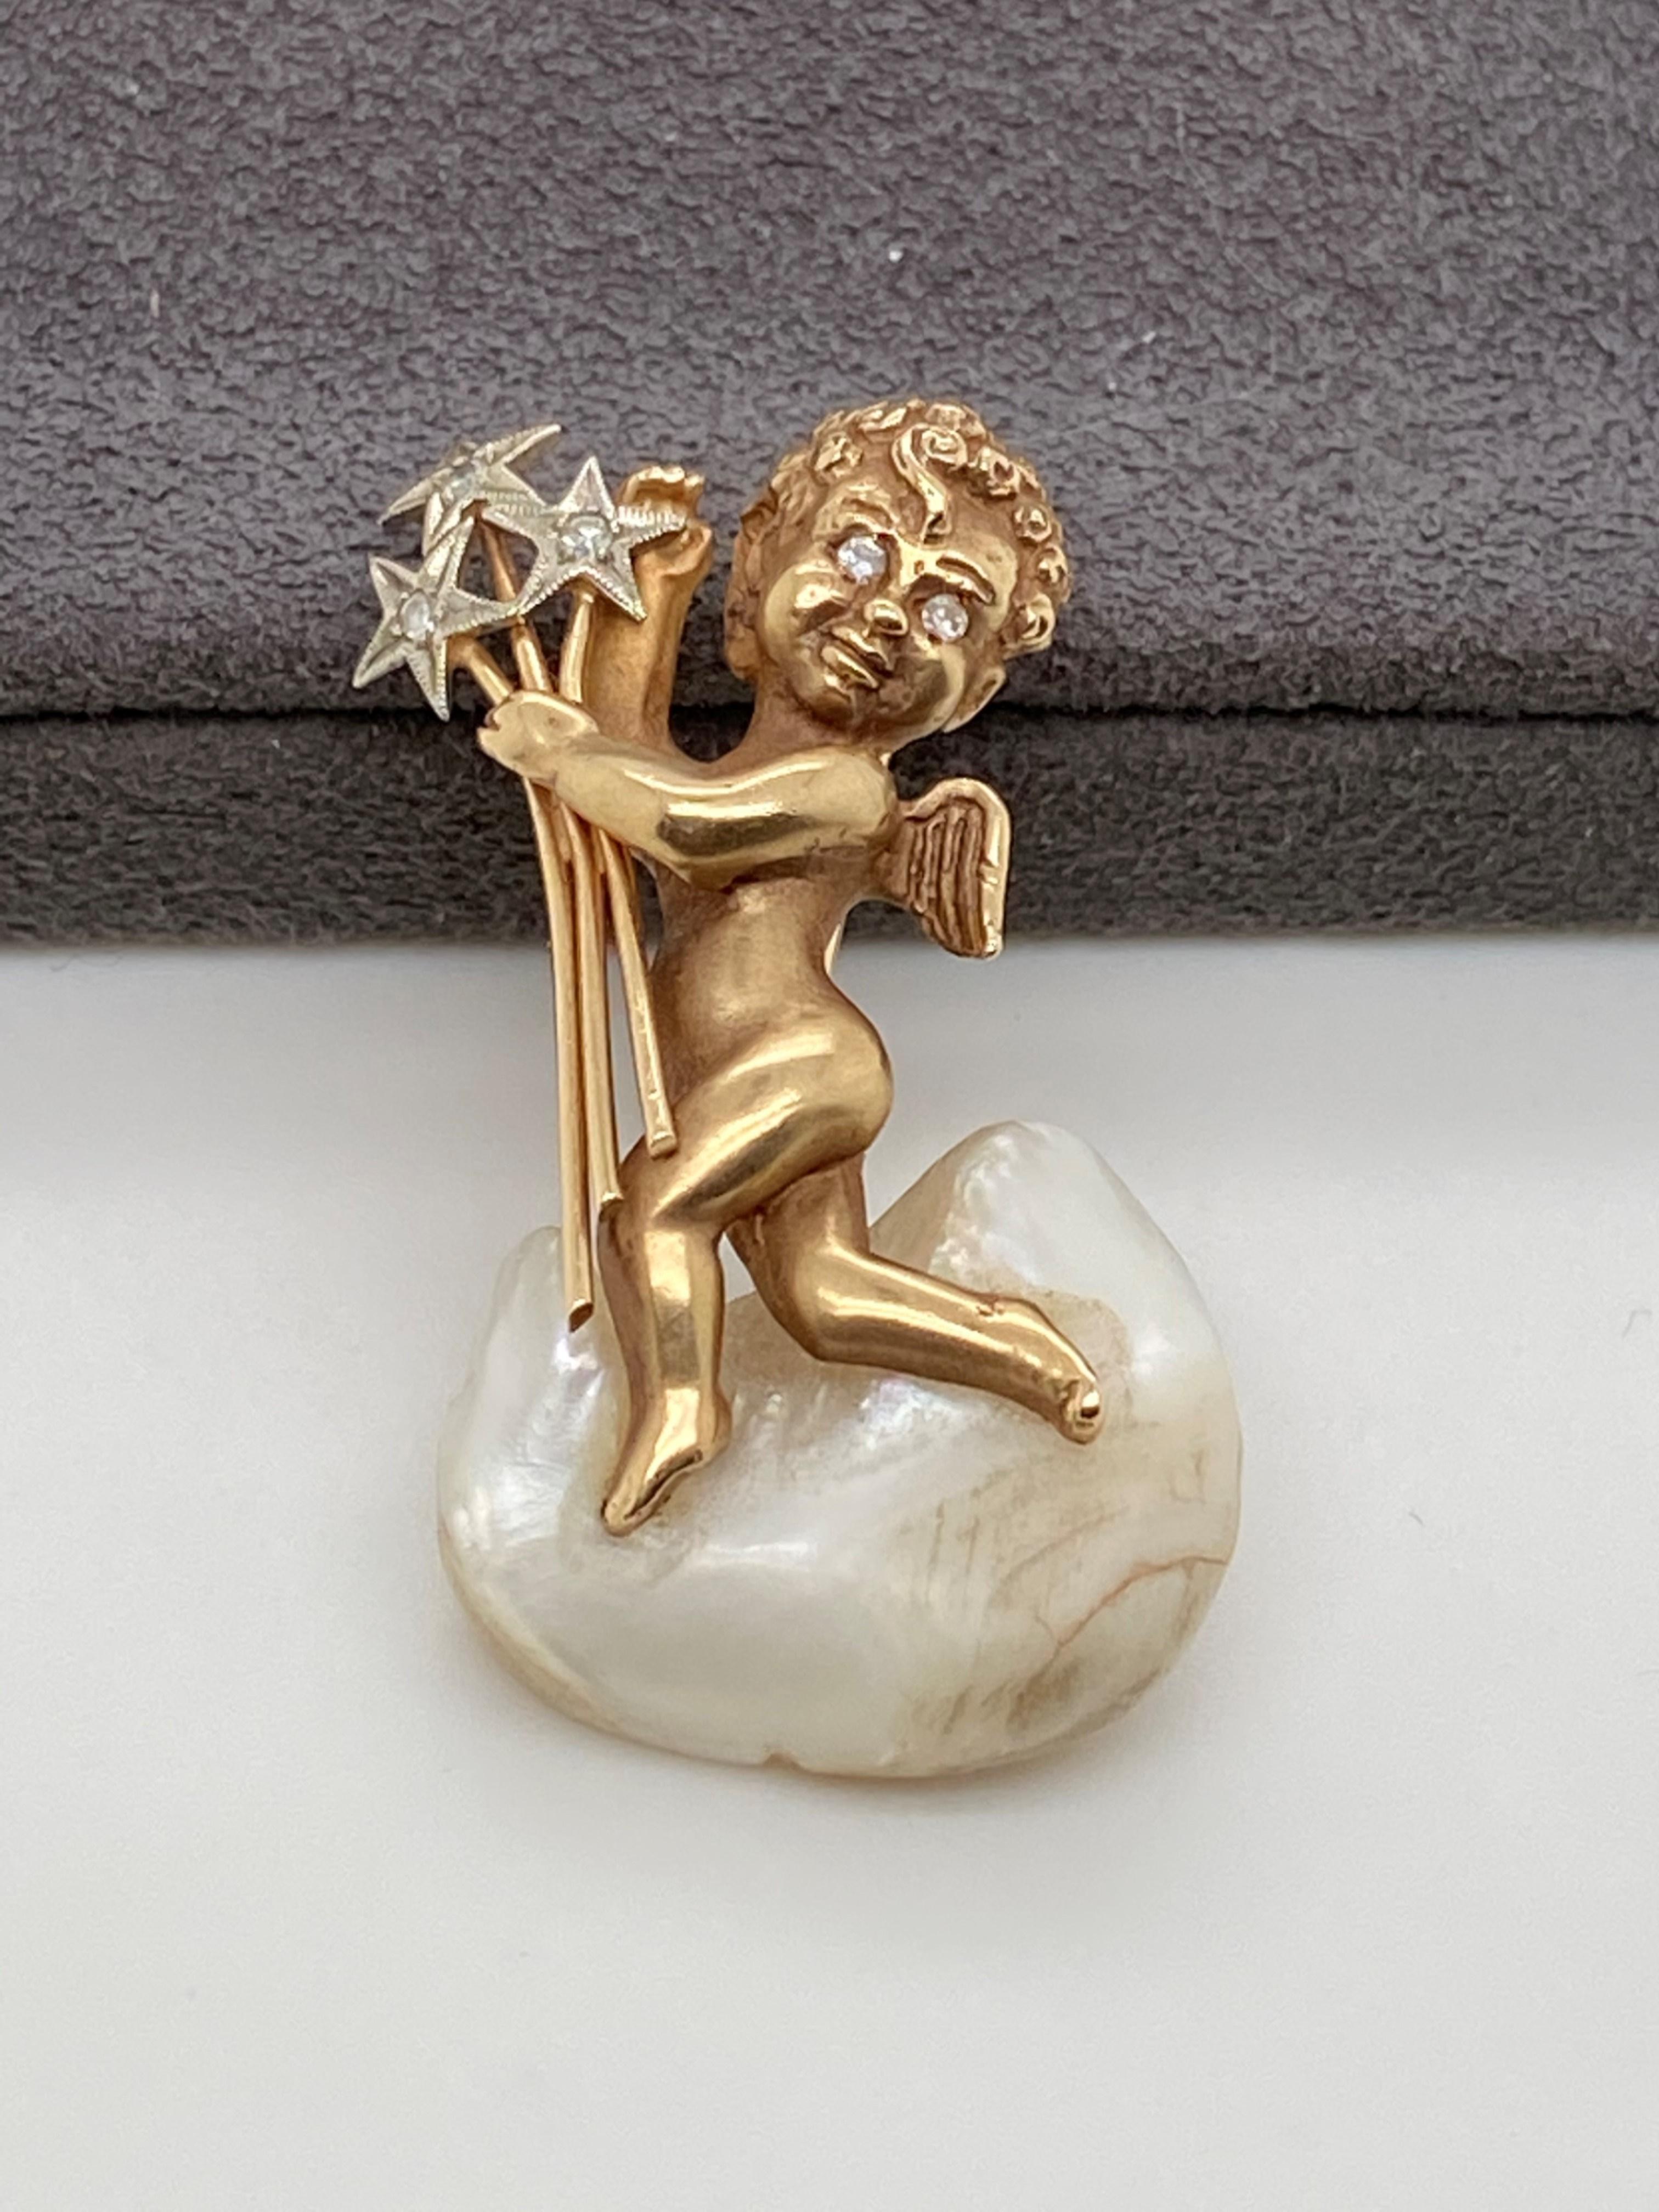 14kt yellow gold pin fashioned like a cherub holding a bouquet of stars and standing on a cloud made of mother of pearl. The diamonds weigh approximately .05 ct K-L color/ SI1-SI2 clarity. The pin dates to the 1950's and measures 1